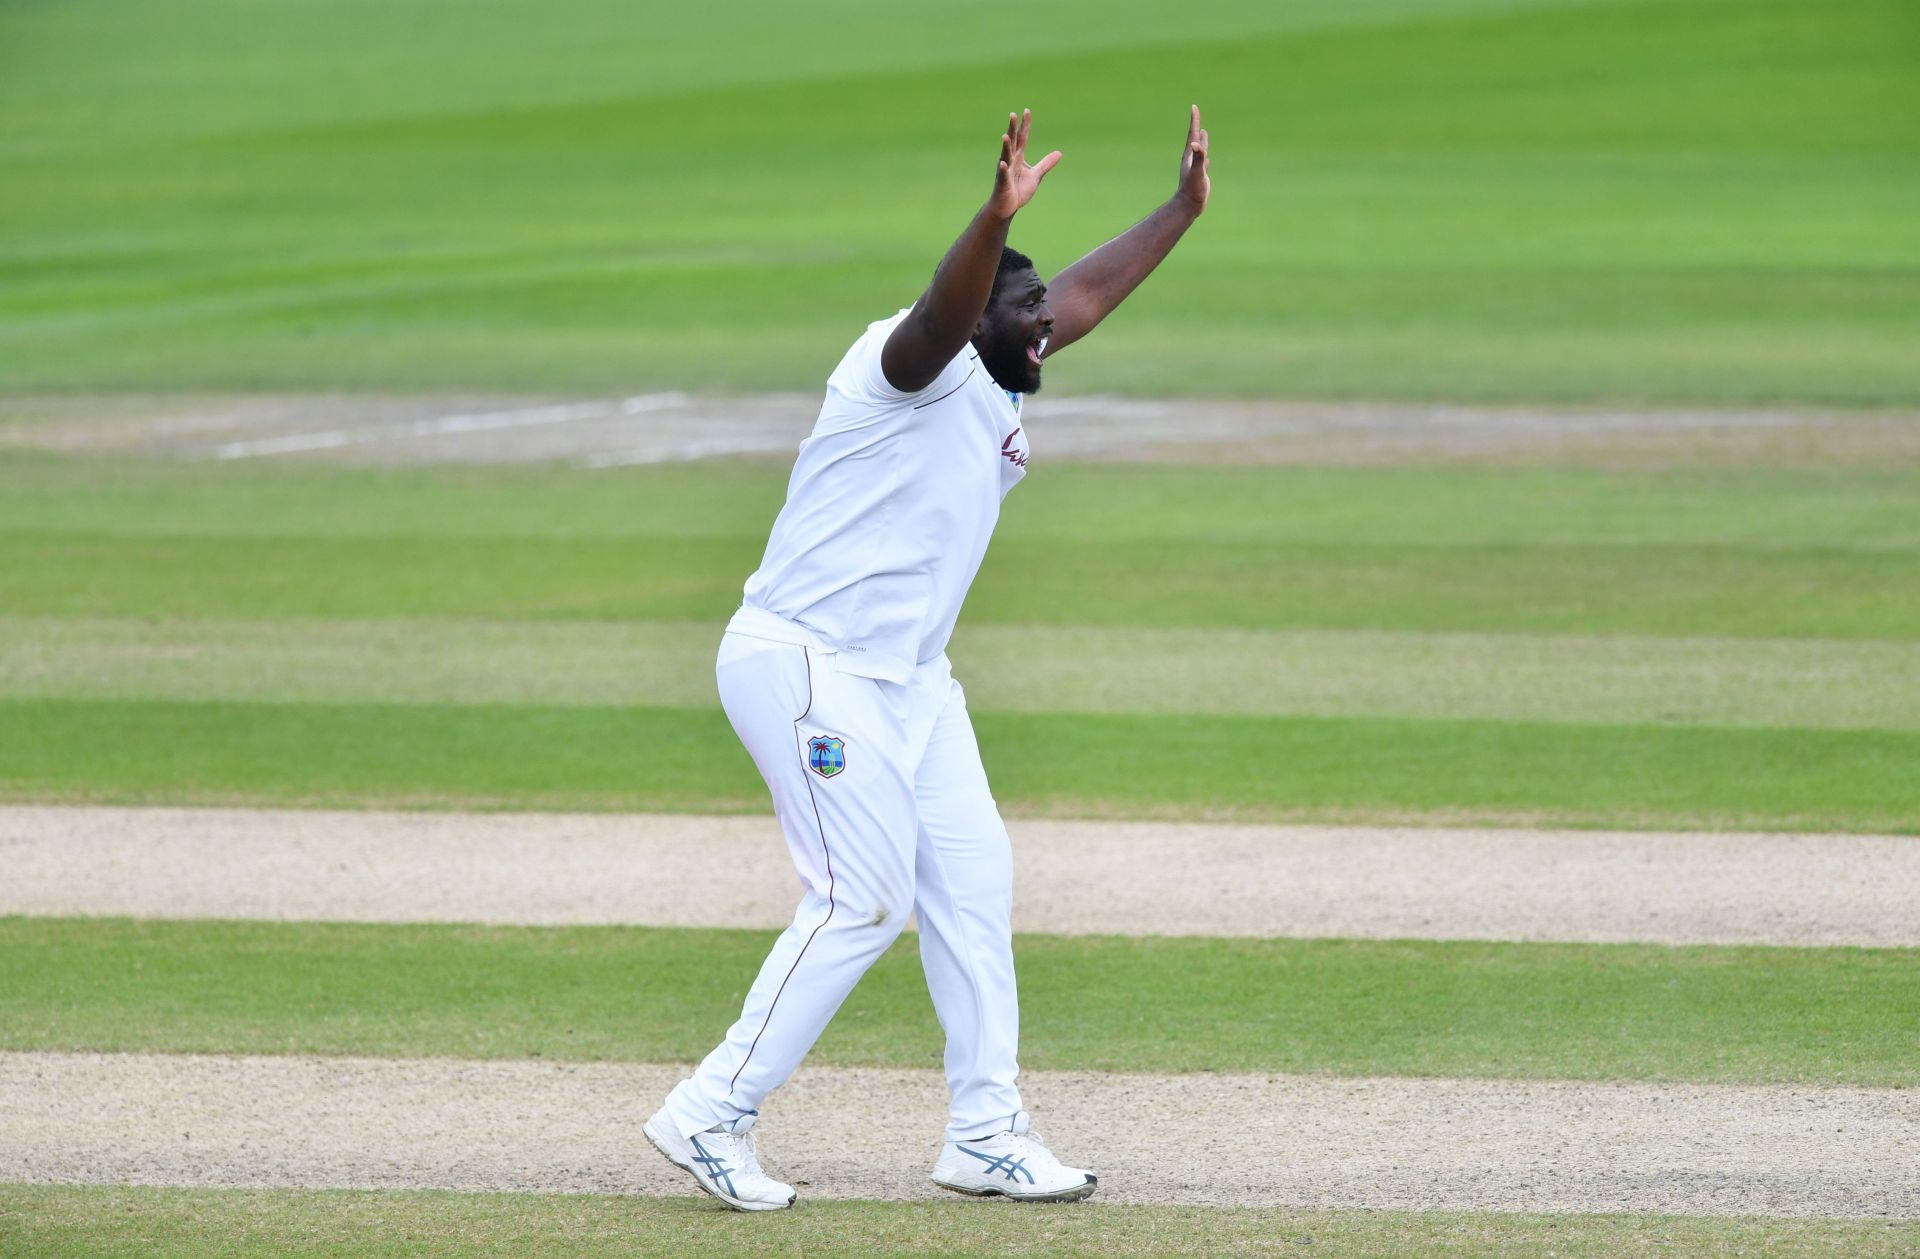 Cornwall could make a comeback to the Windies playing XI